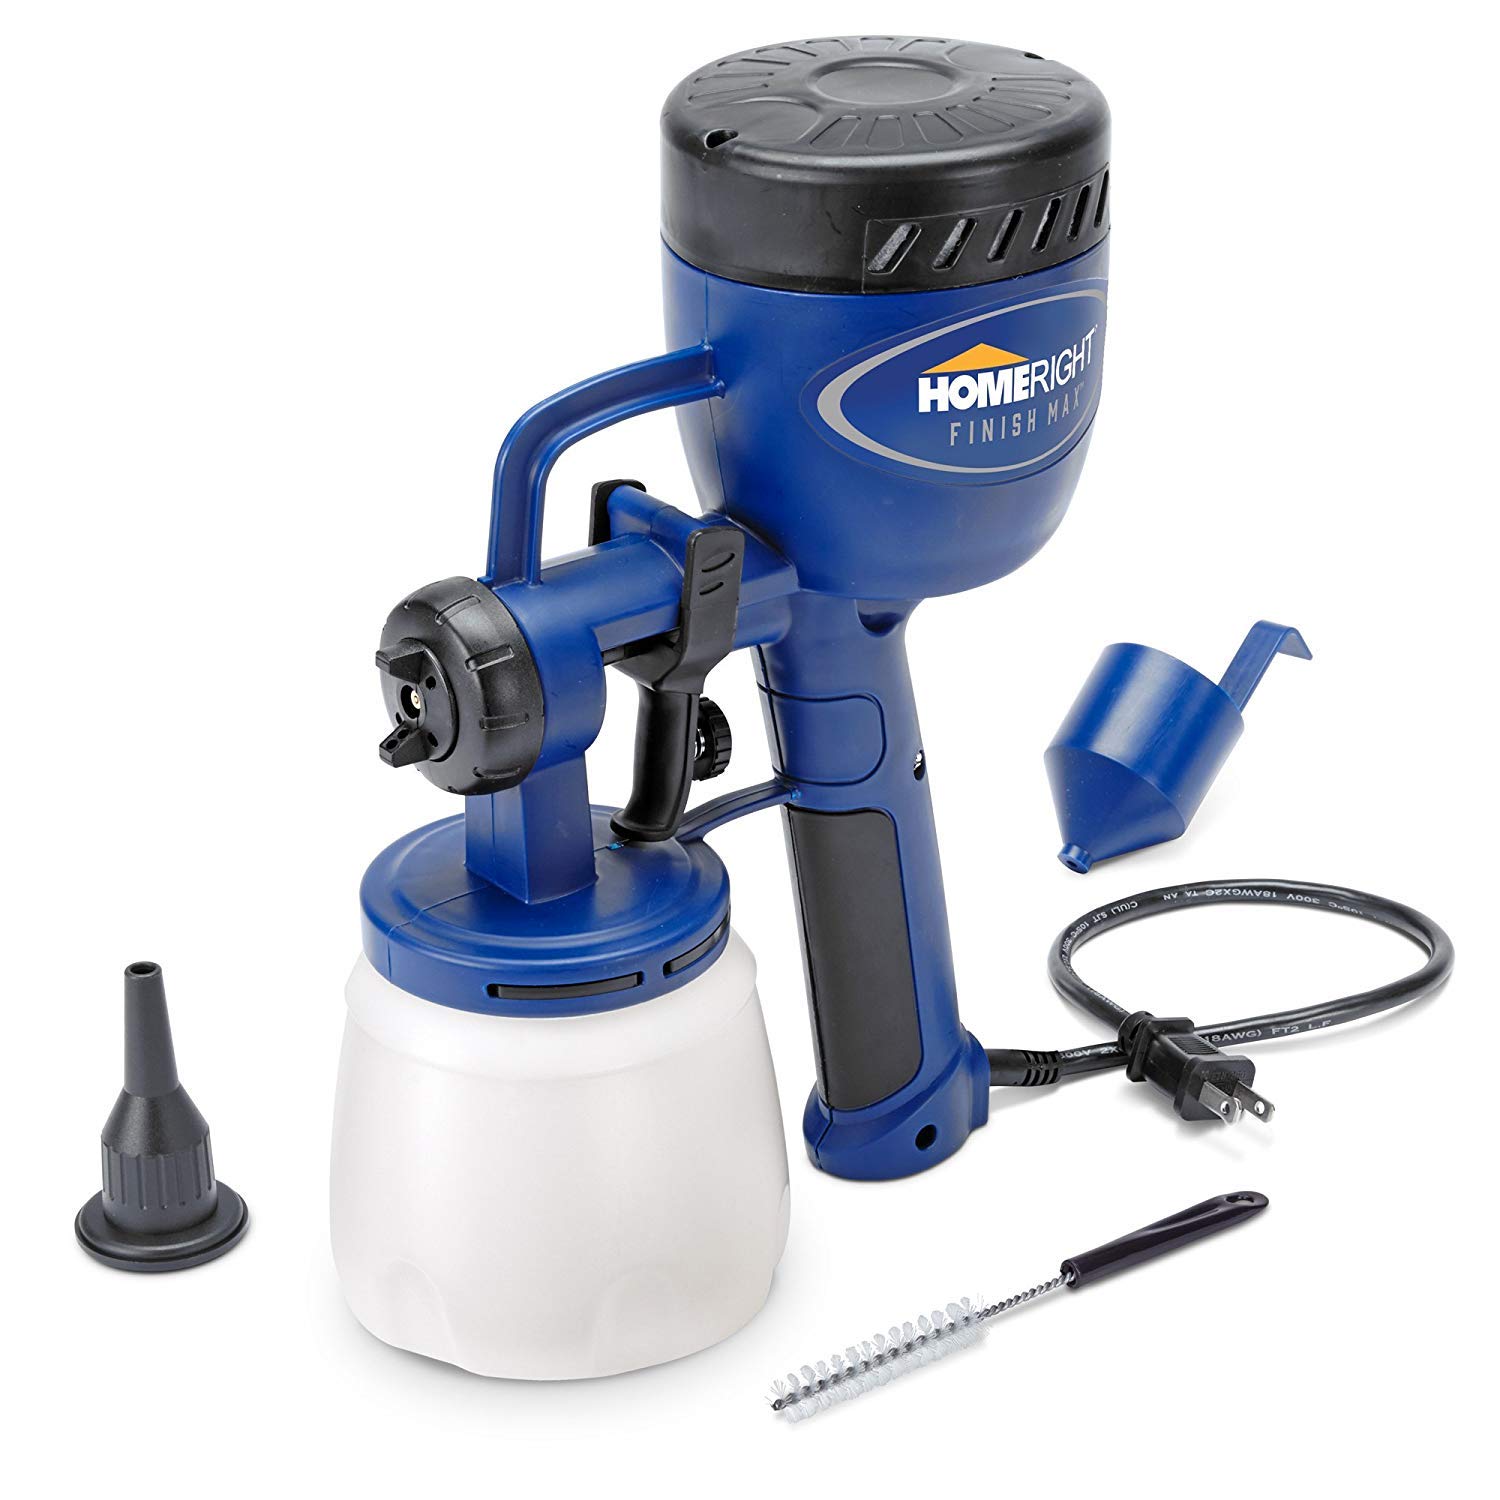 HomeRight Finish Max Fine HVLP Paint Sprayer $27.80 + Free Shipping w/ Prime or on $35+